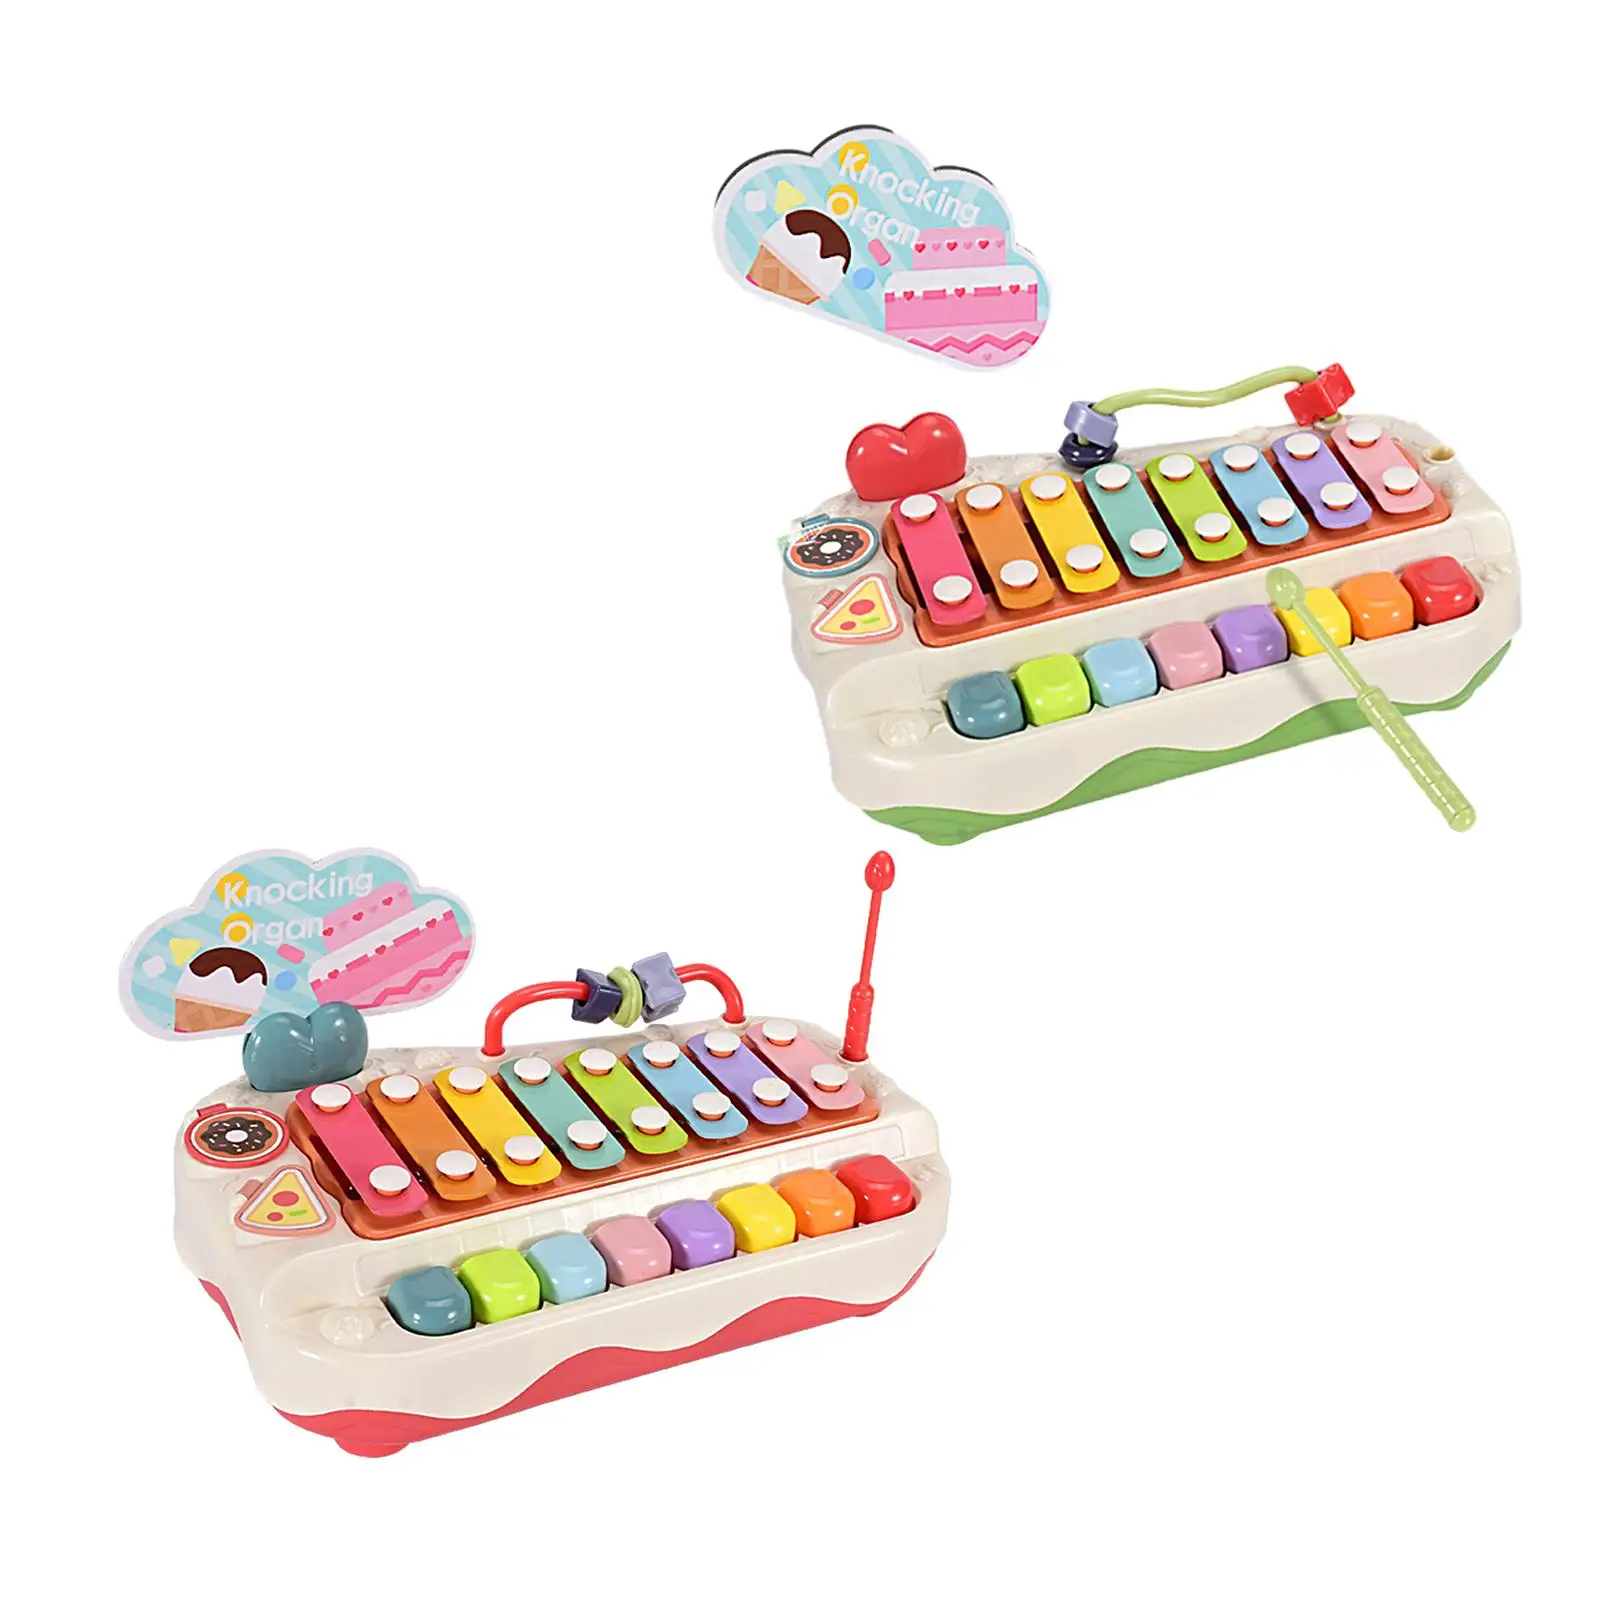 Musical Toy Learning Toy Multicolored Musical Instrument Toy Hand Knocking Piano Piano Toy for Boy Girls Toddler Kids 3+ Gifts